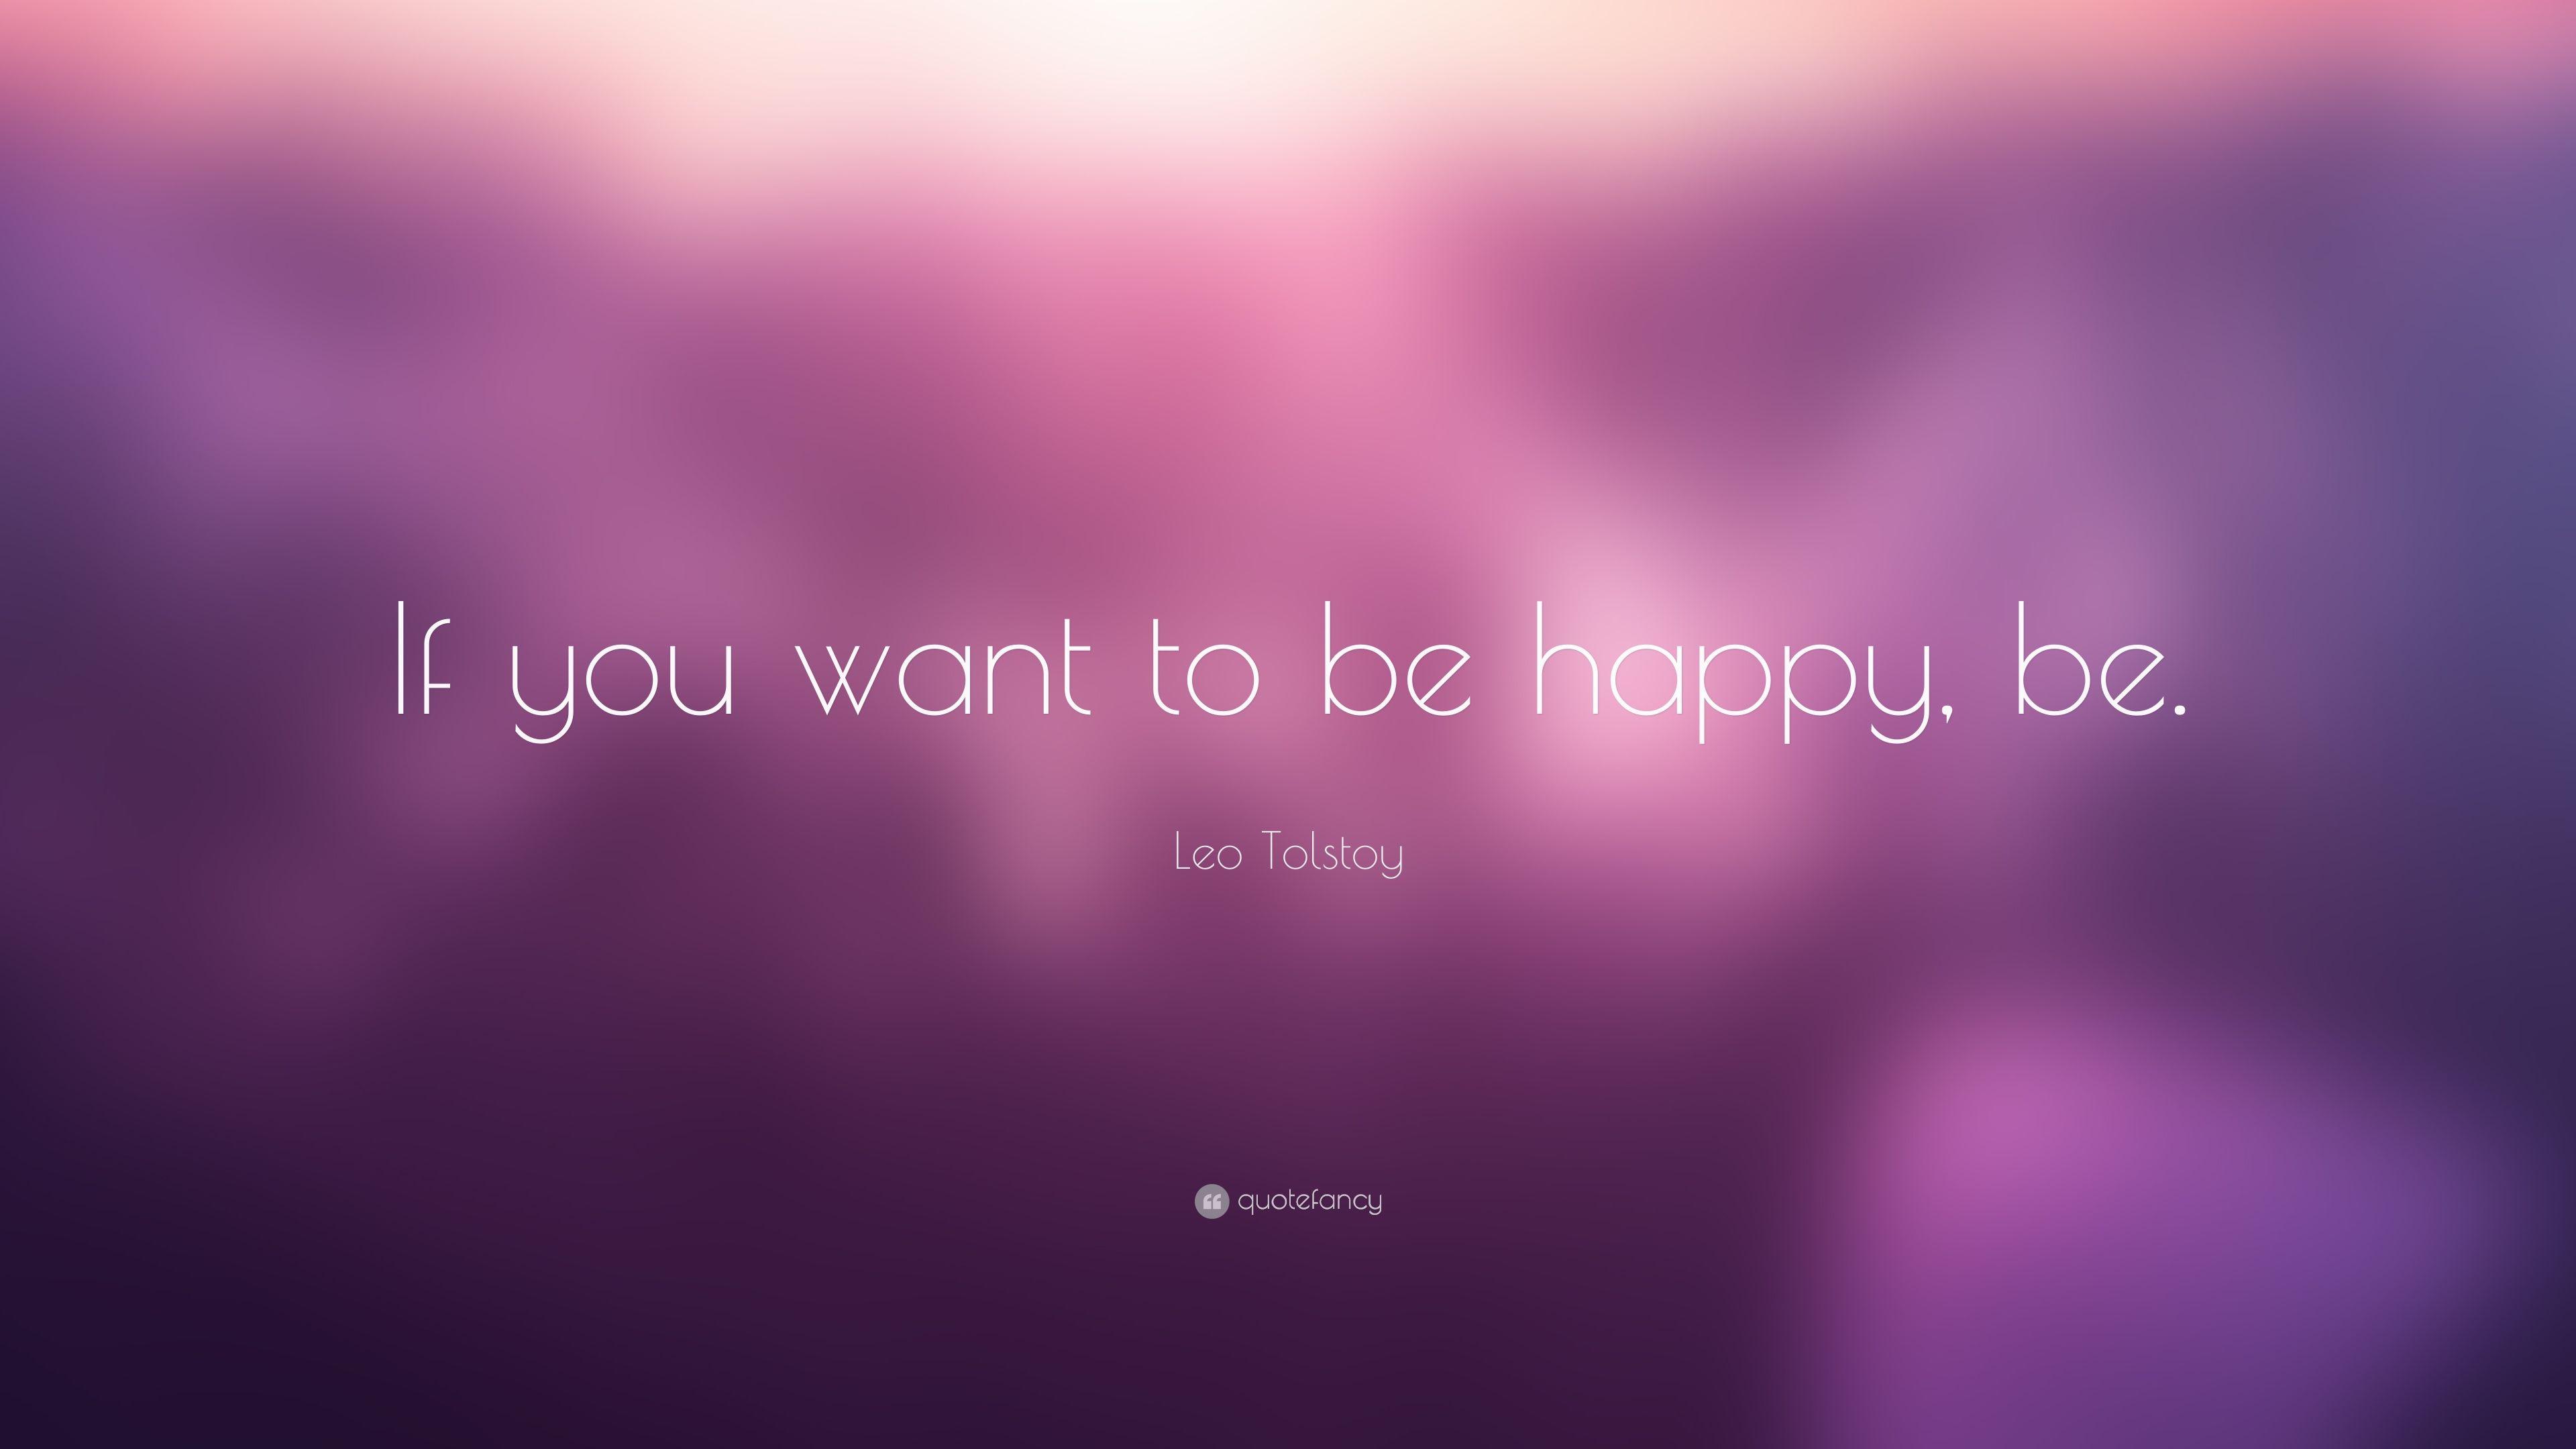 Leo Tolstoy Quote: “If you want to be happy, be.” 23 wallpaper